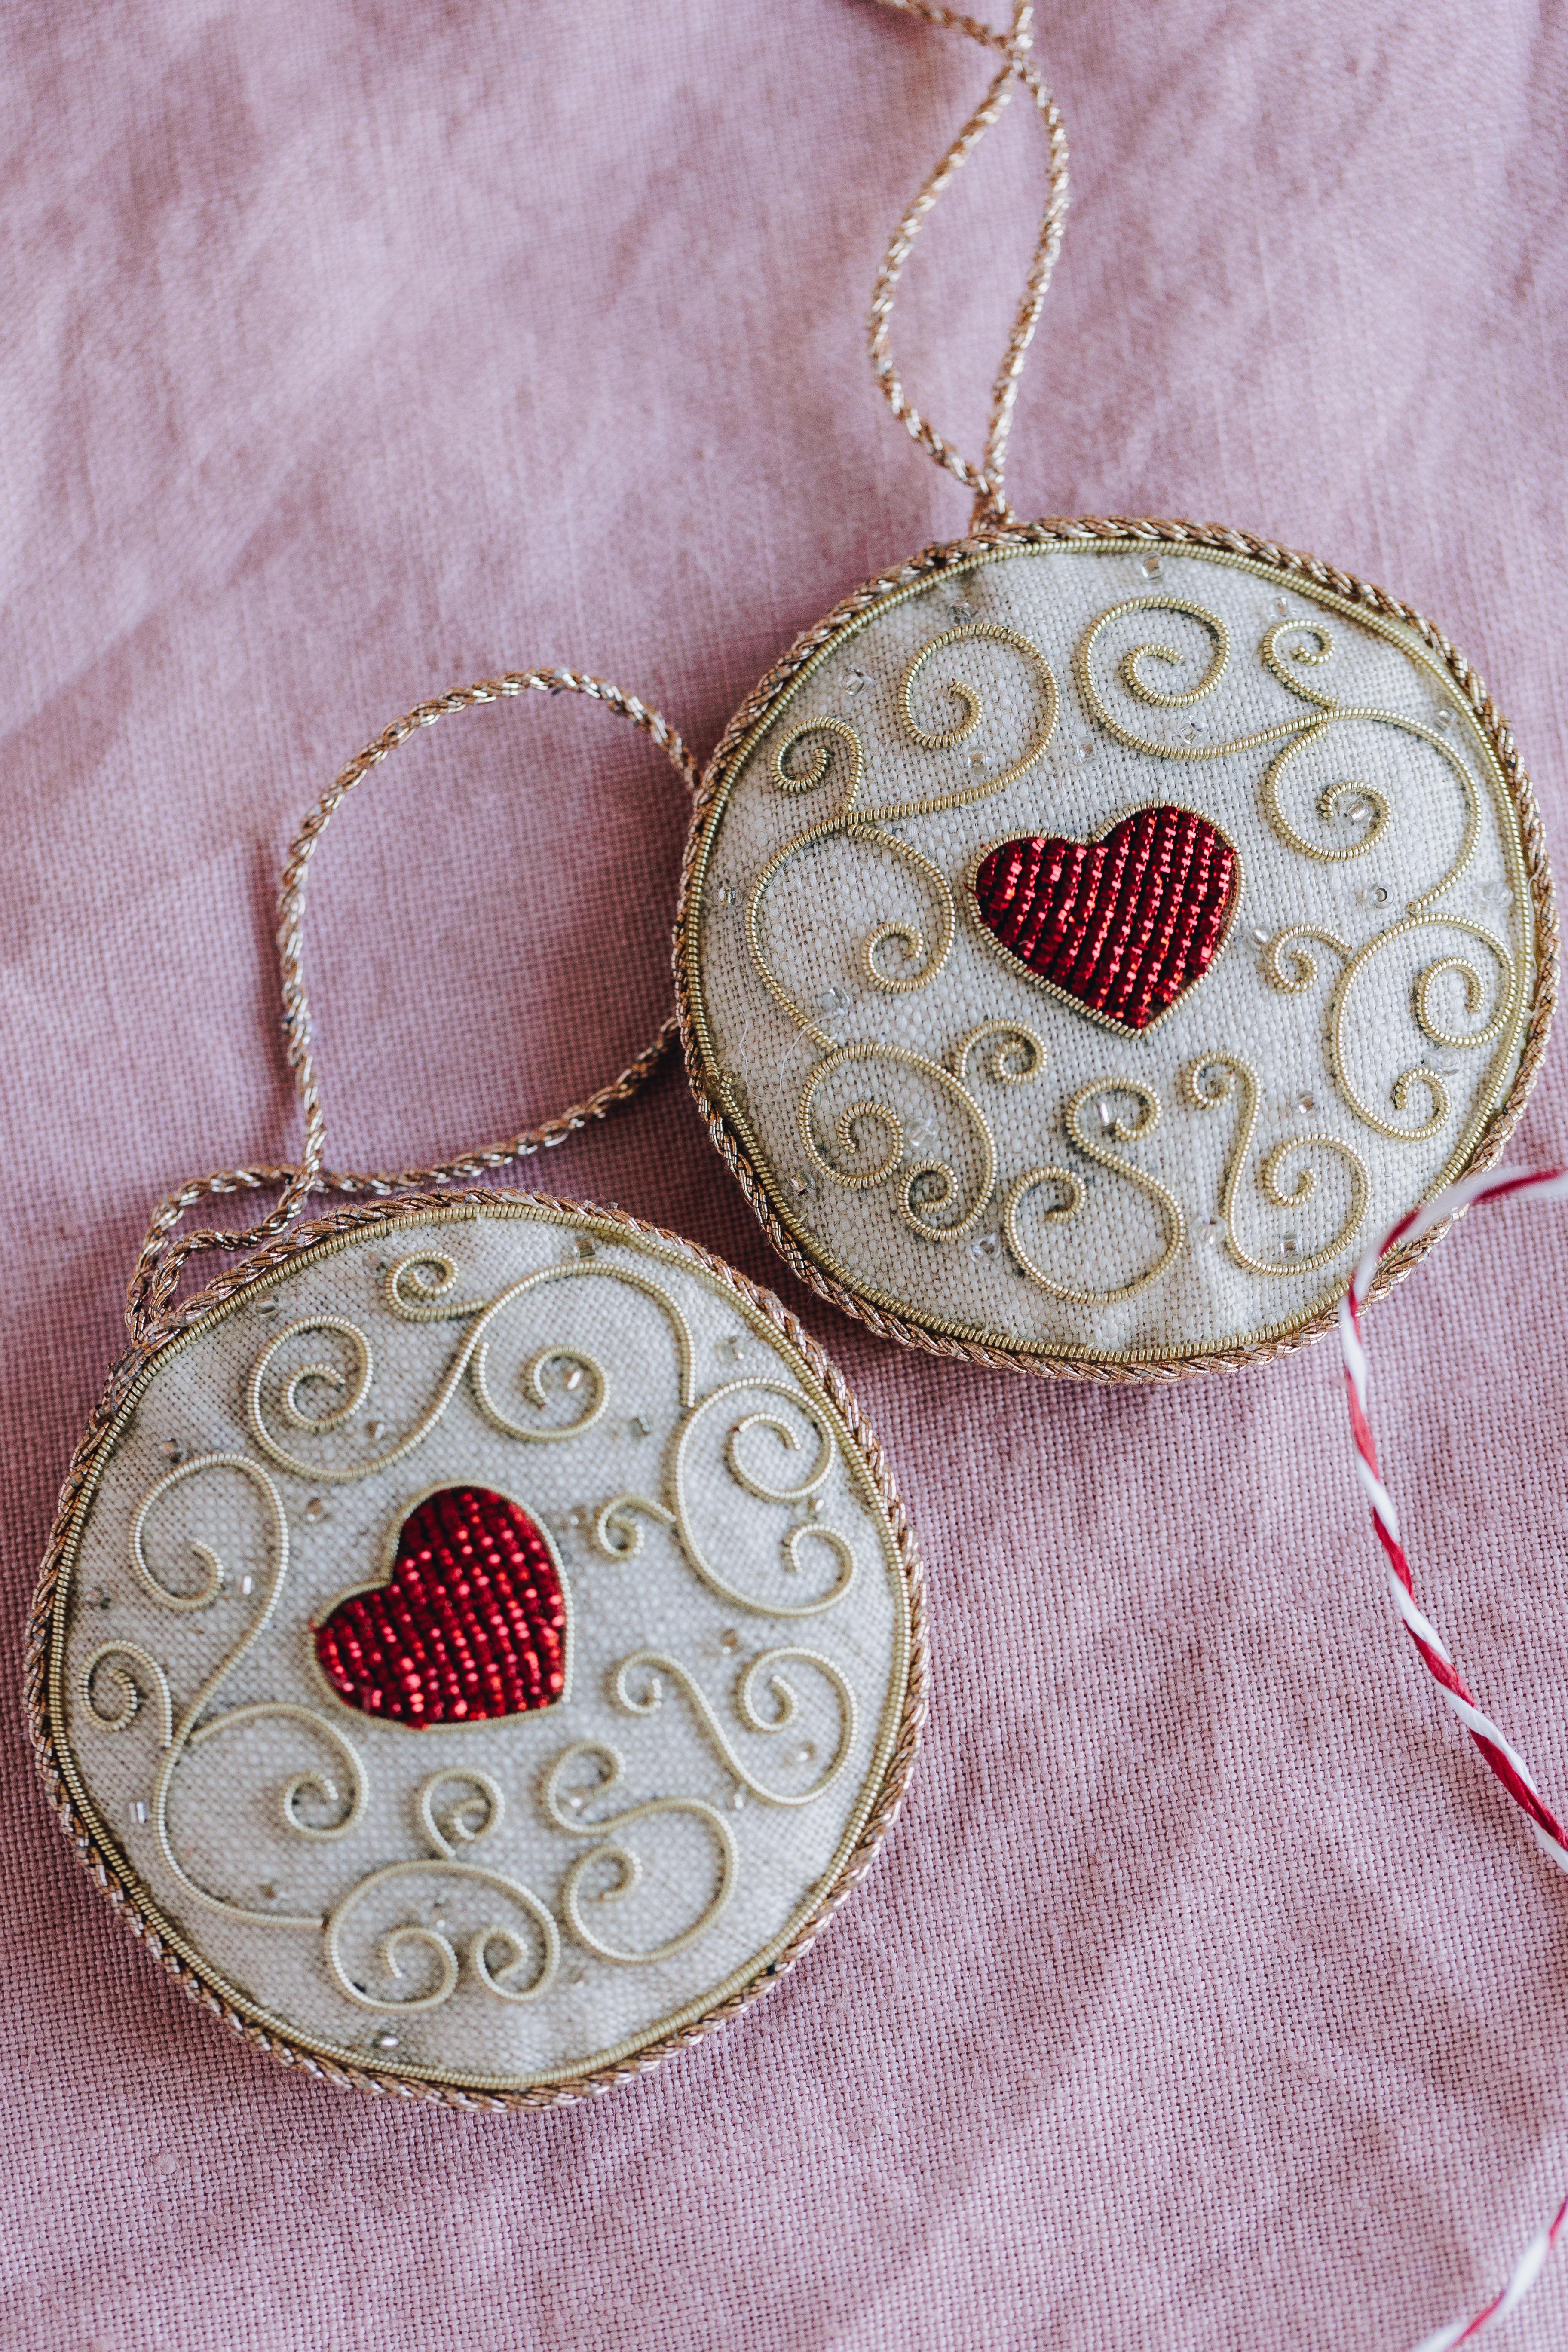 Hand-Crafted Set of 9 Christmas Ornaments Vintage Irish Linen English Biscuits Jammie Heart For Sale